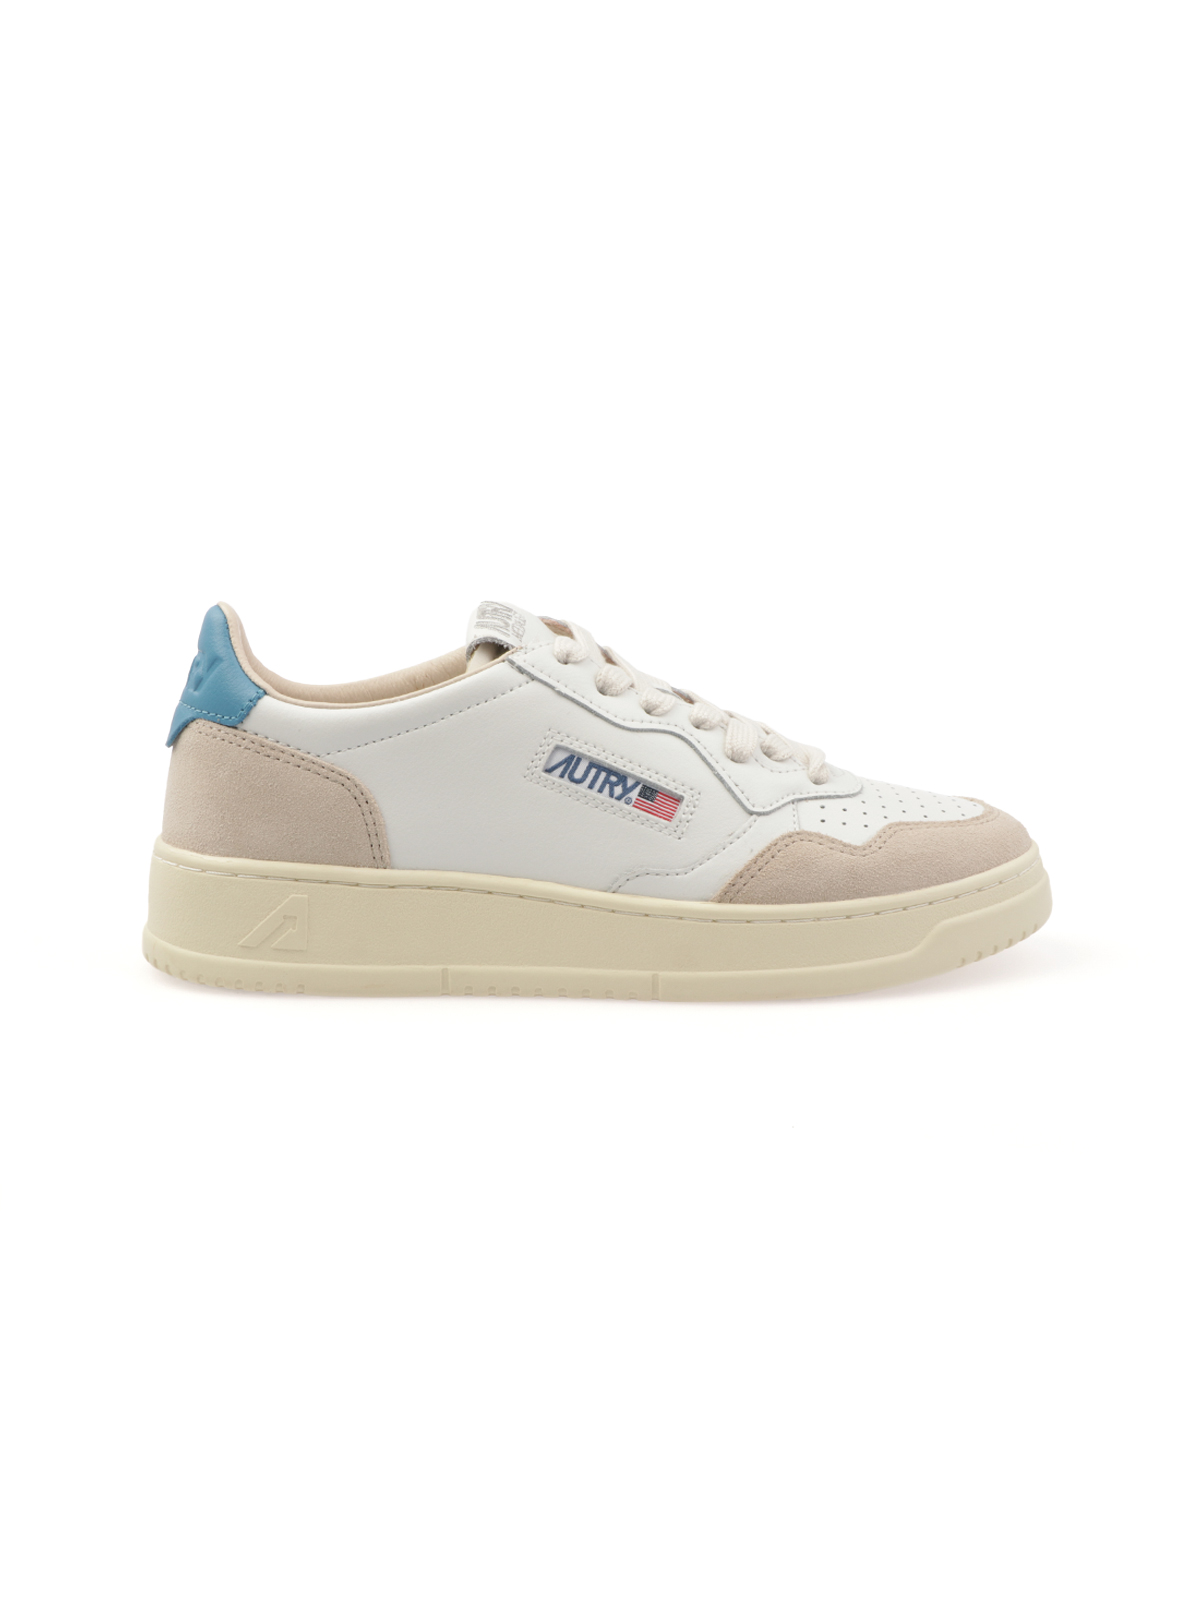 Immagine di AUTRY | Sneakers Uomo Medalist Low in Suede